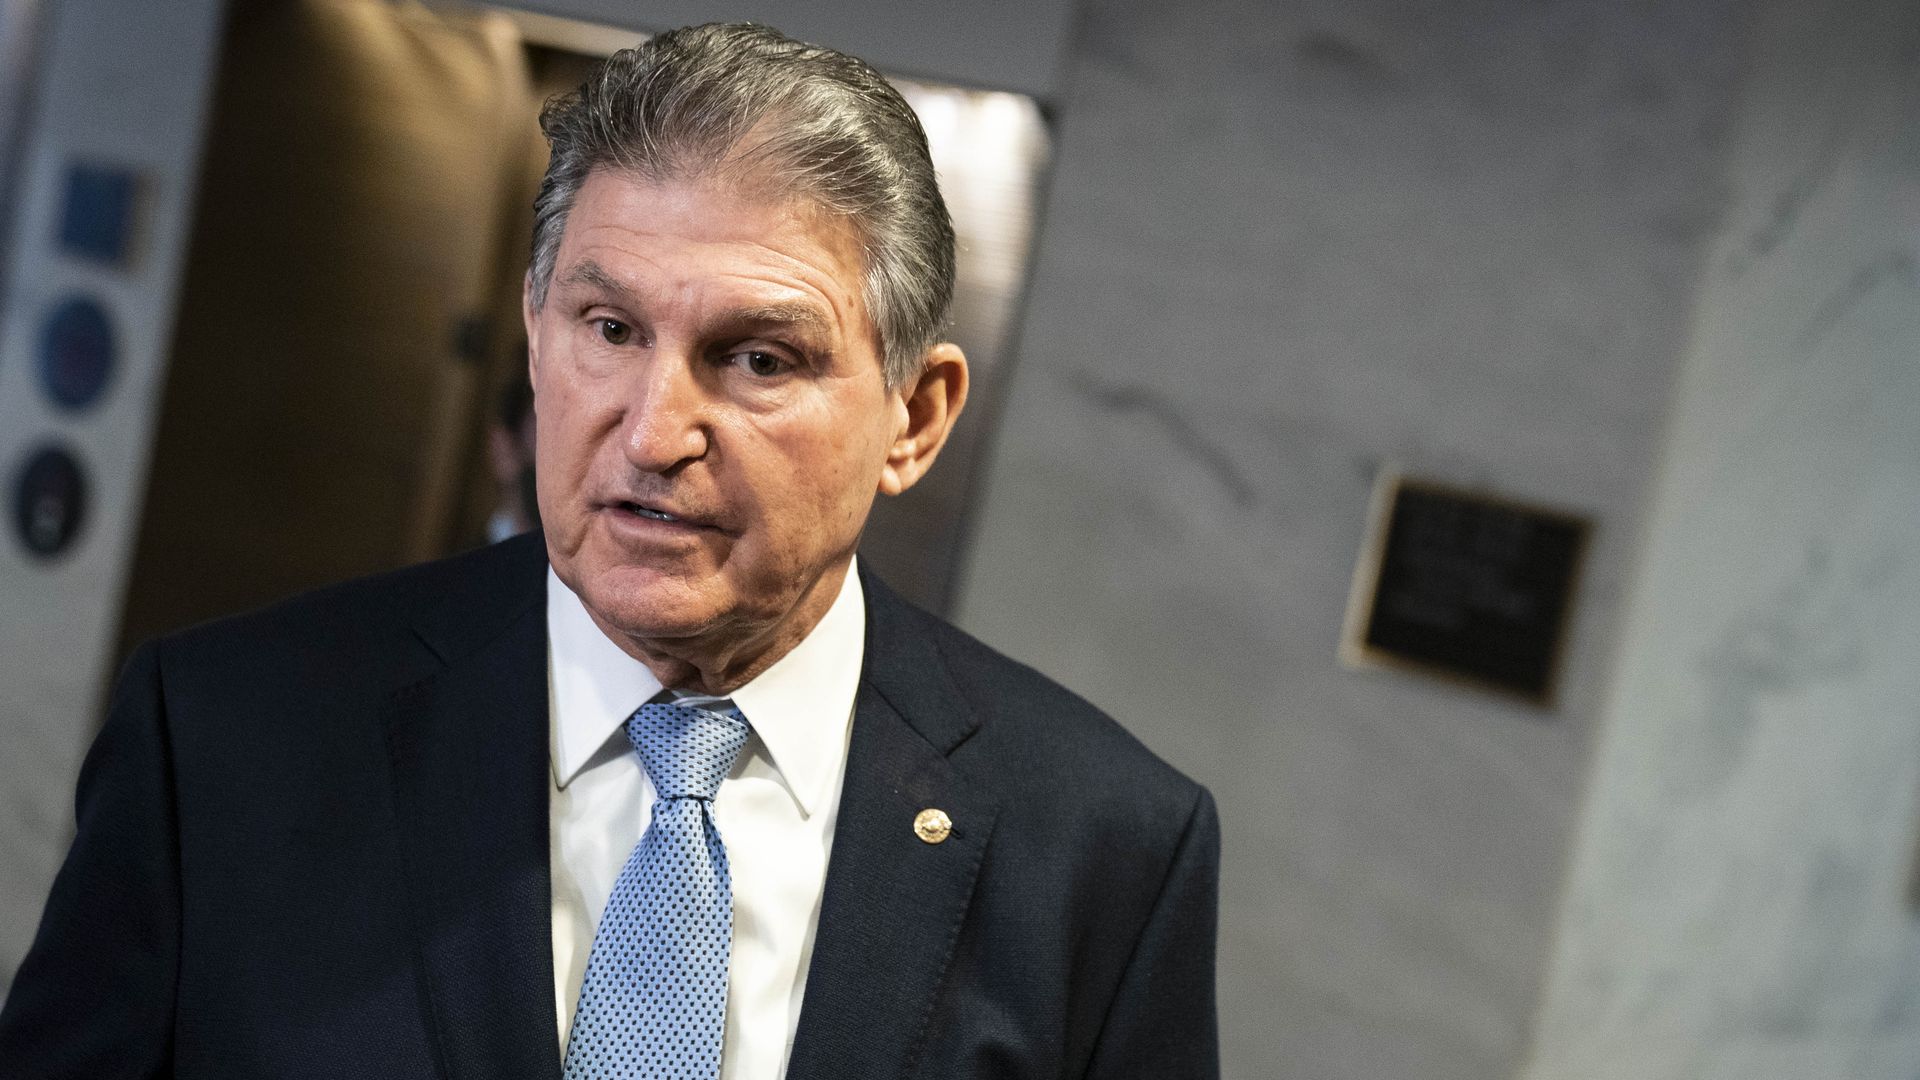 Sen. Joe Manchin (D-W.Va.) stands in front of an elevator at the Capitol.